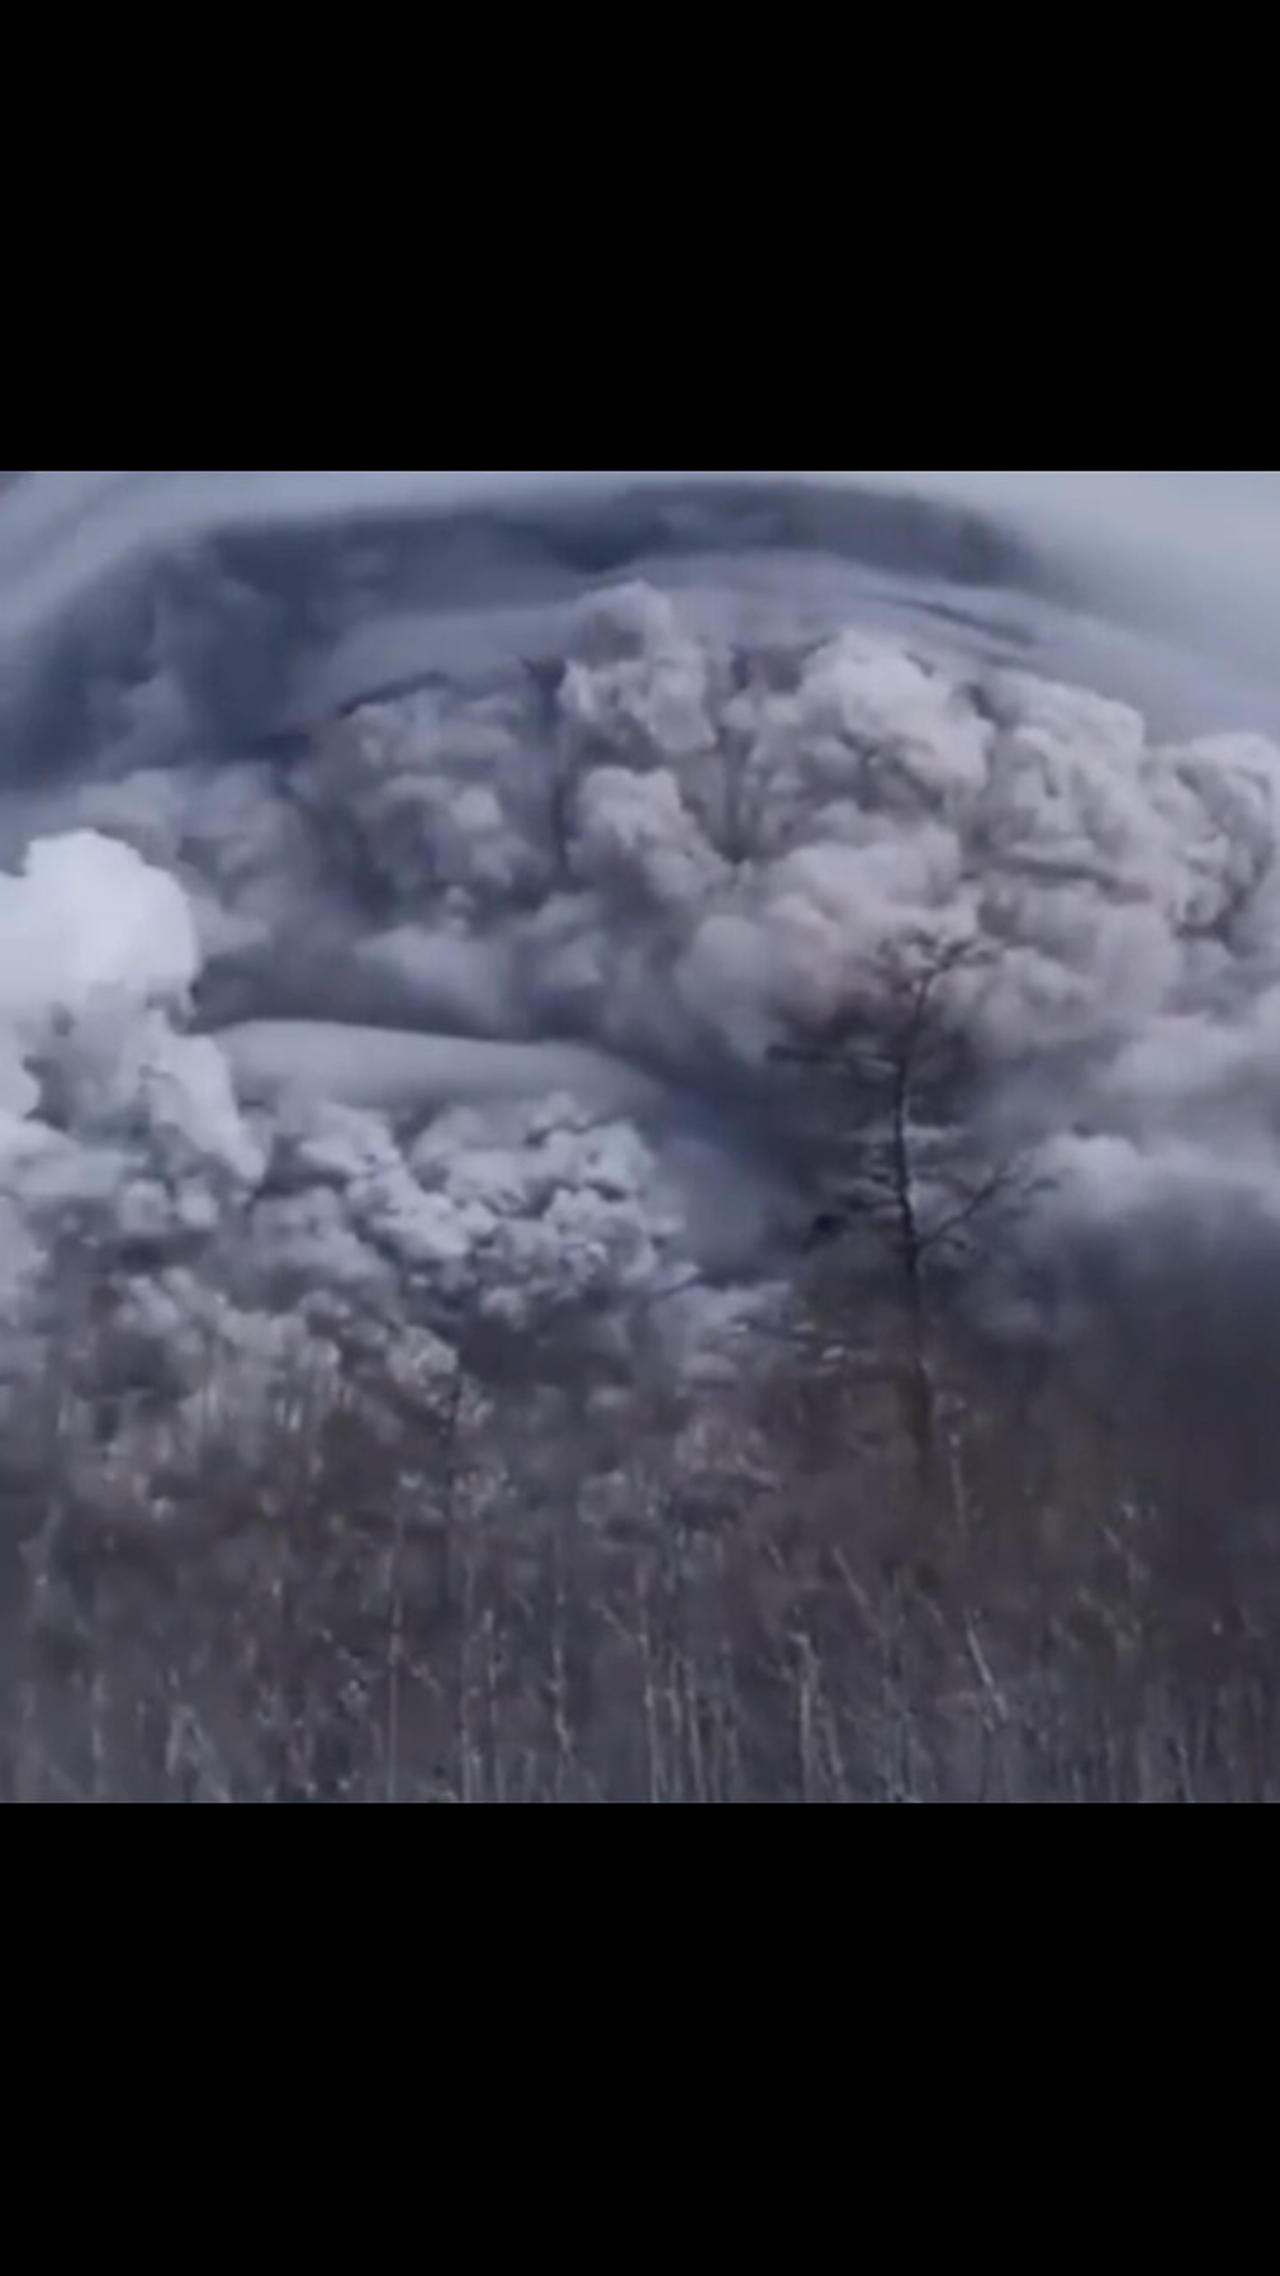 Shiveluch Volcano in Russia's Kamchatka peninsula erupted, 10 kilometers of Ash in the Sky